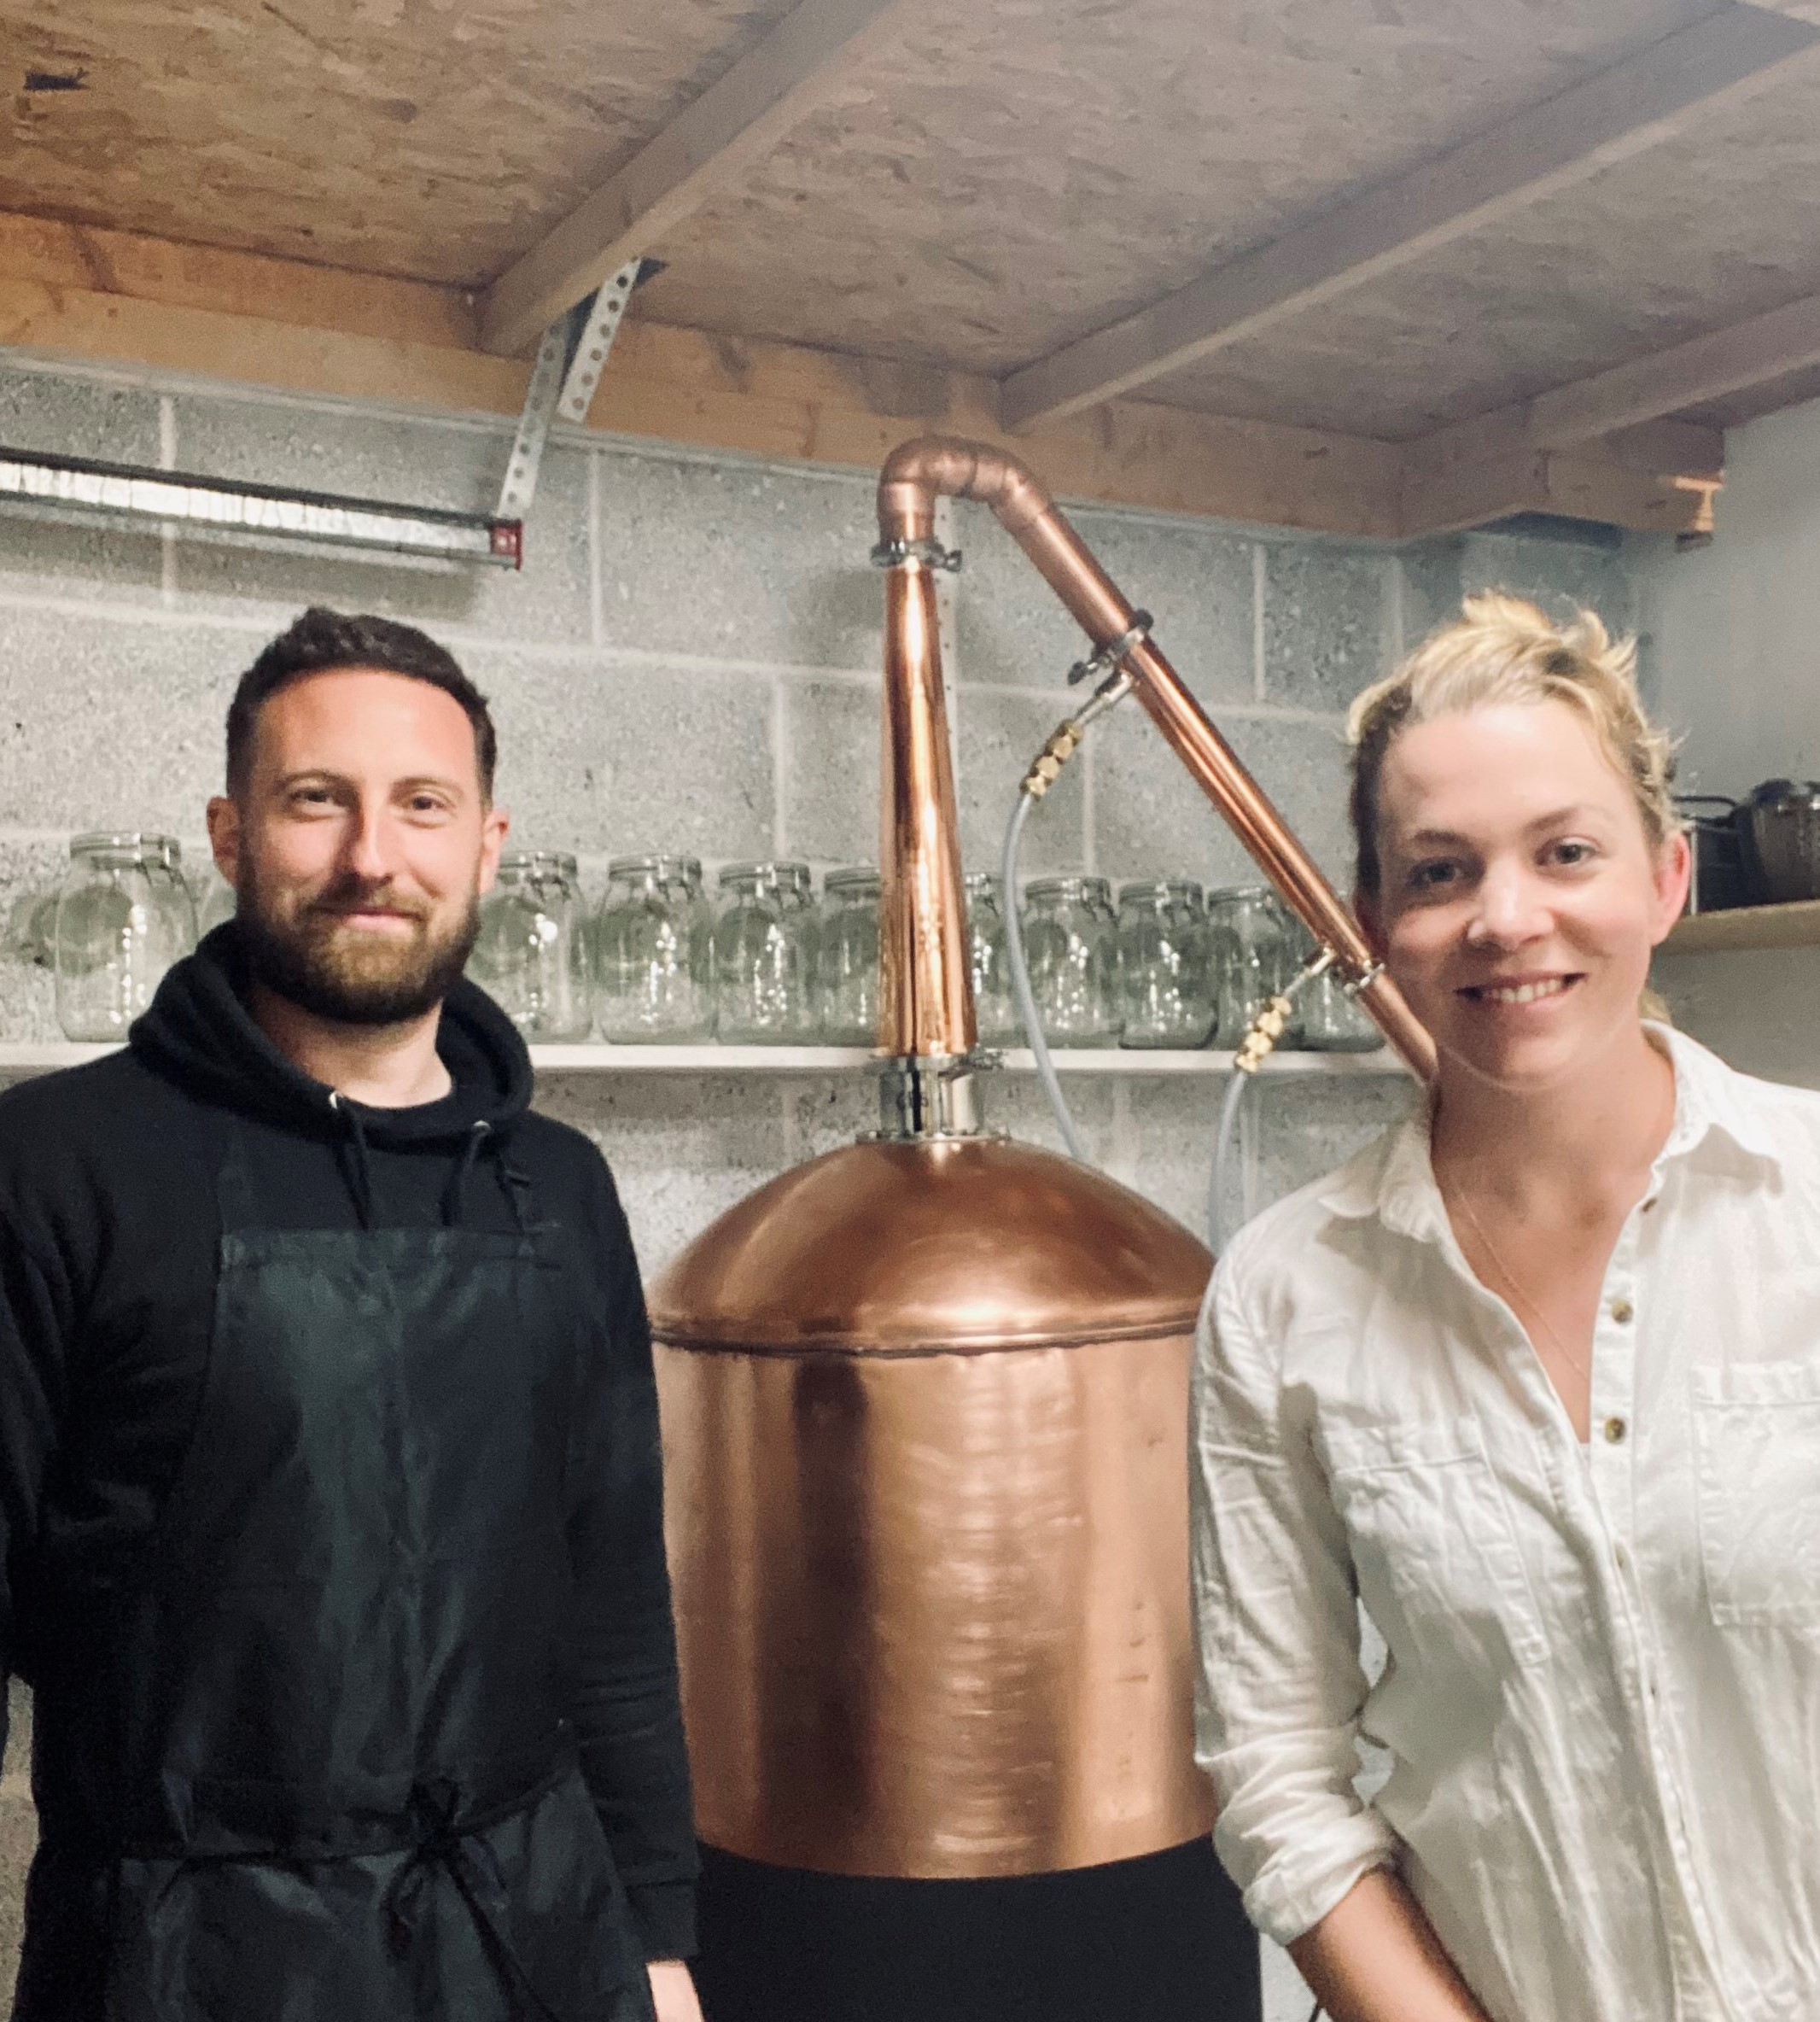 New micro rum distillery launches in Strathaven